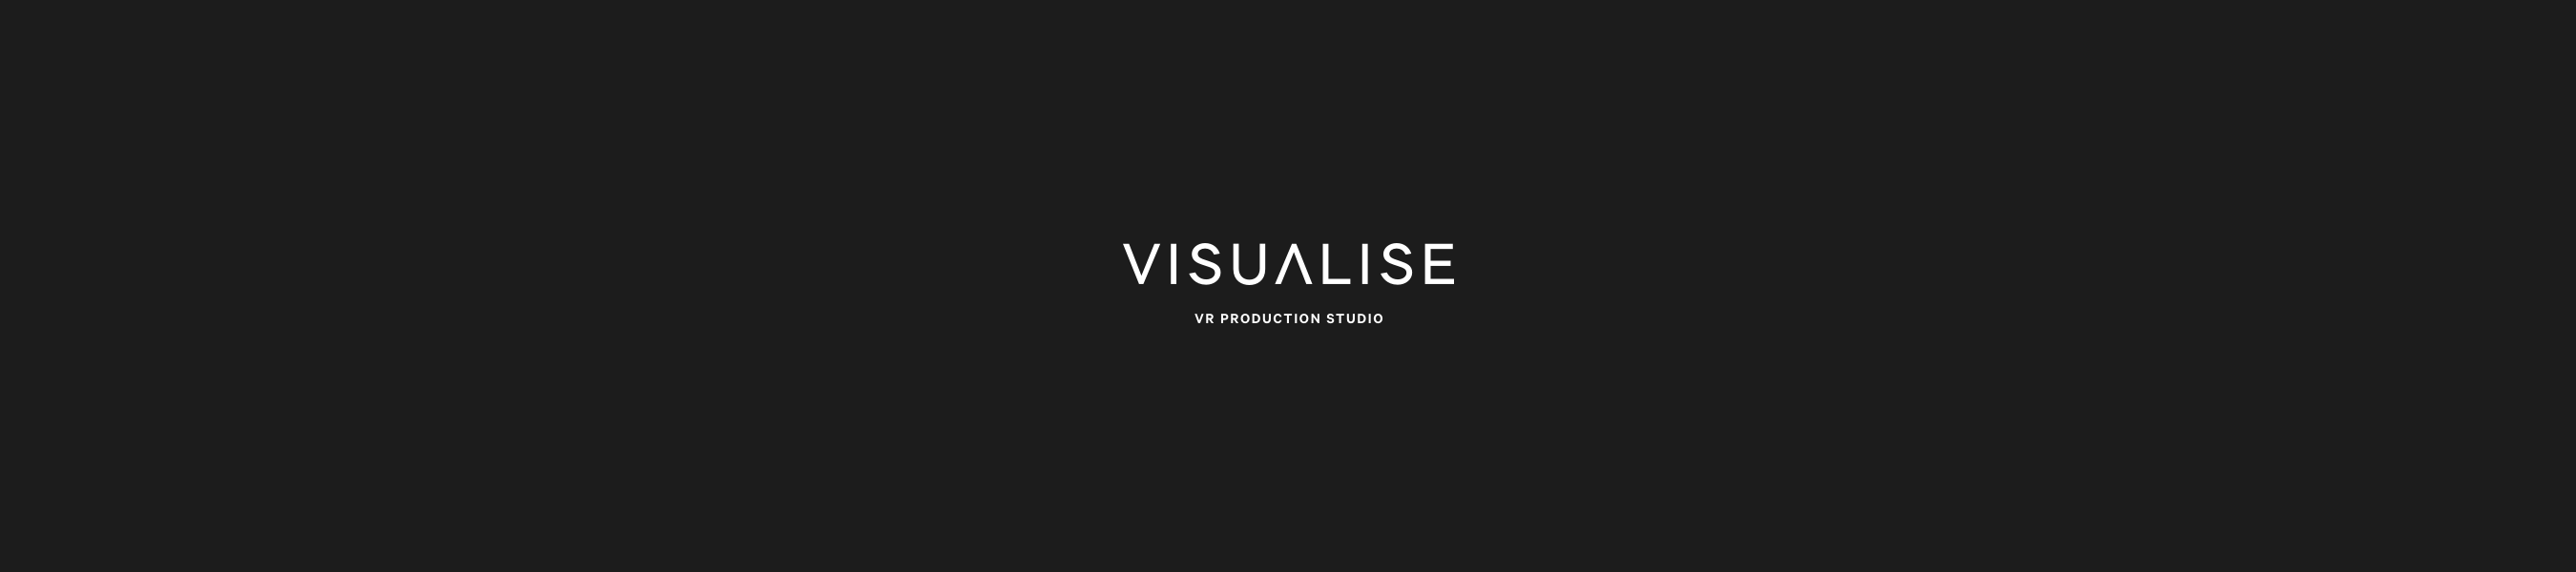 contact-us-visualise